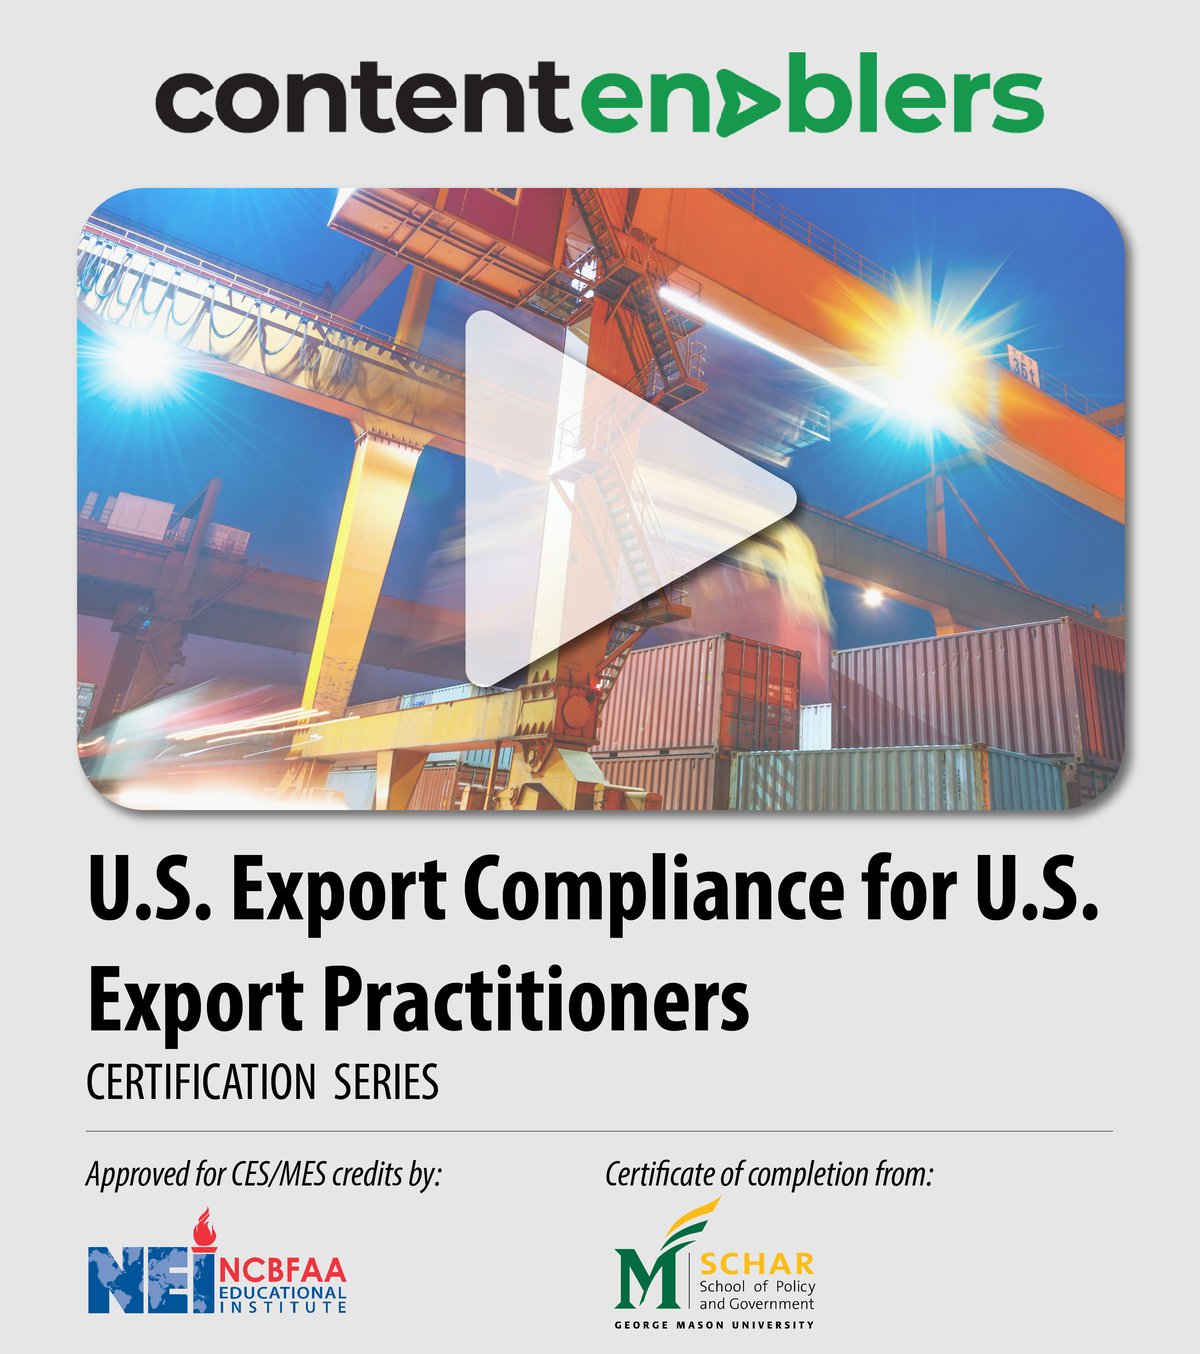 U.S. Export Compliance Certification Series for U.S. Practitioners_v2